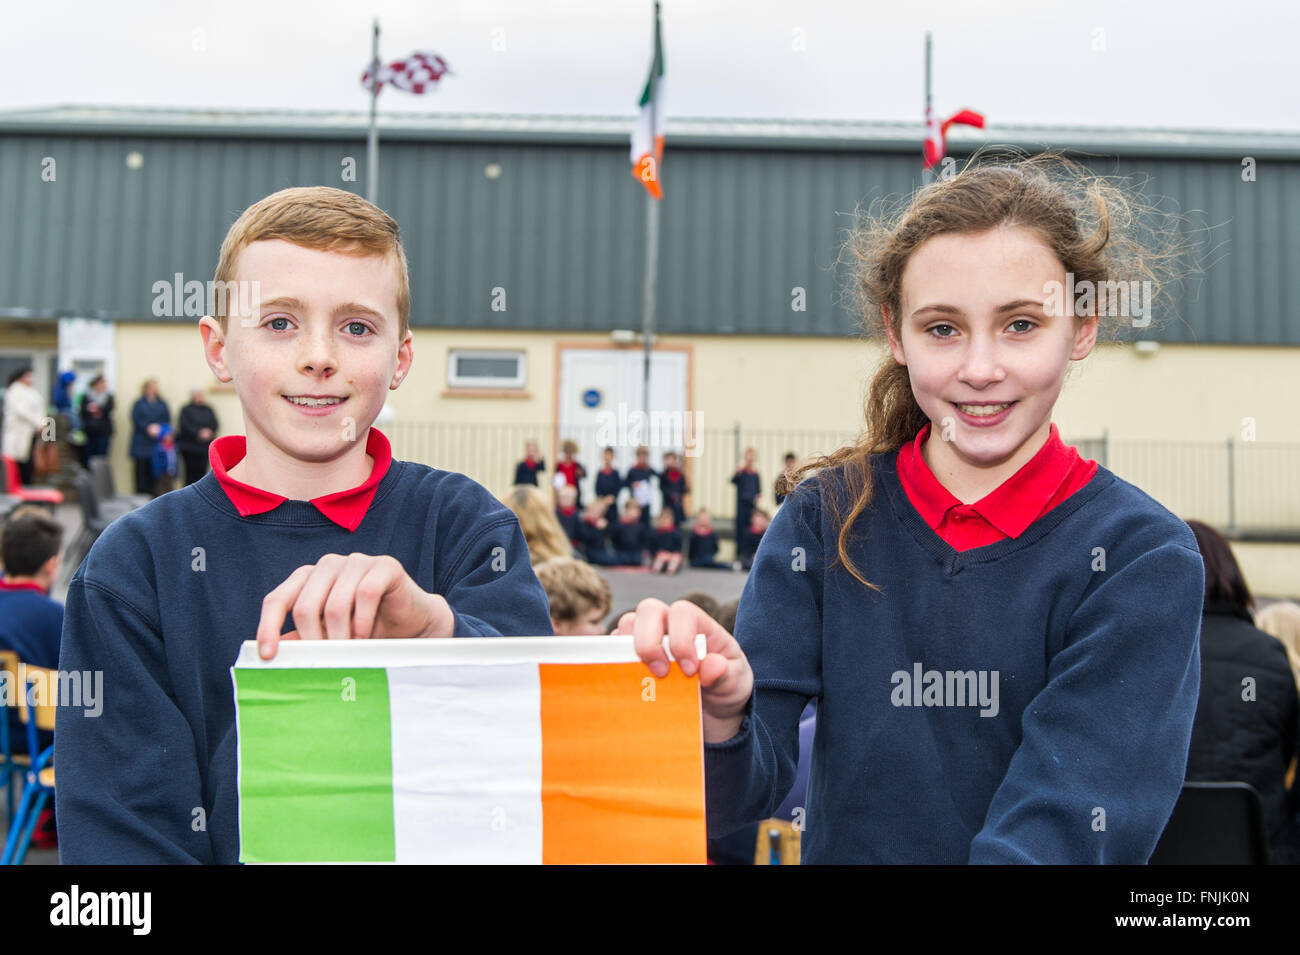 Durrus, Ireland. 15th March, 2016. Pupils James Mallon and Aisling Stock display their classes version of the Proclamation at Carrigboy National School, Durrus, on Proclamation Day which was held to commemorate the events of 1916. Credit: Andy Gibson/Alamy Live News. Stock Photo